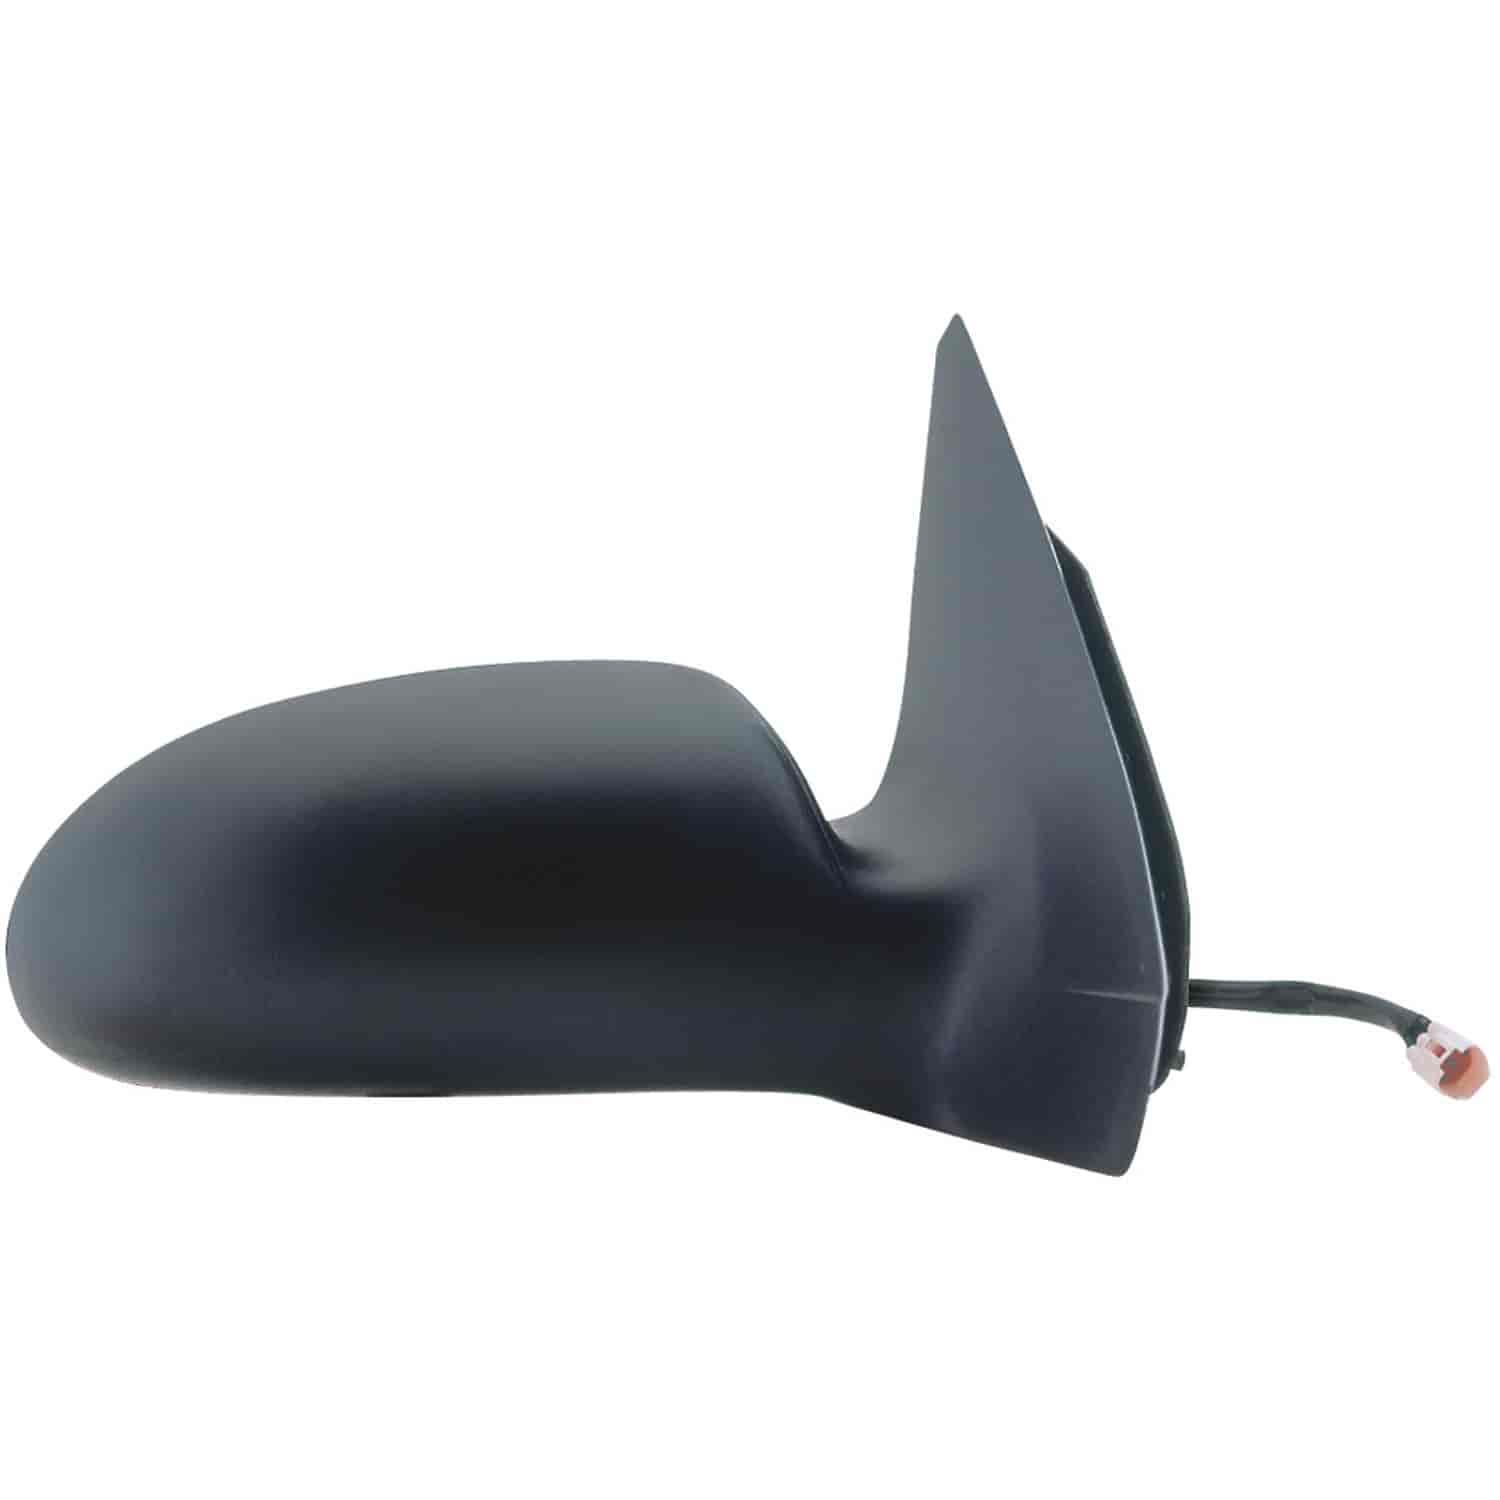 OEM Style Replacement mirror for 00-07 Ford Focus w/o SVT model passenger side mirror tested to fit